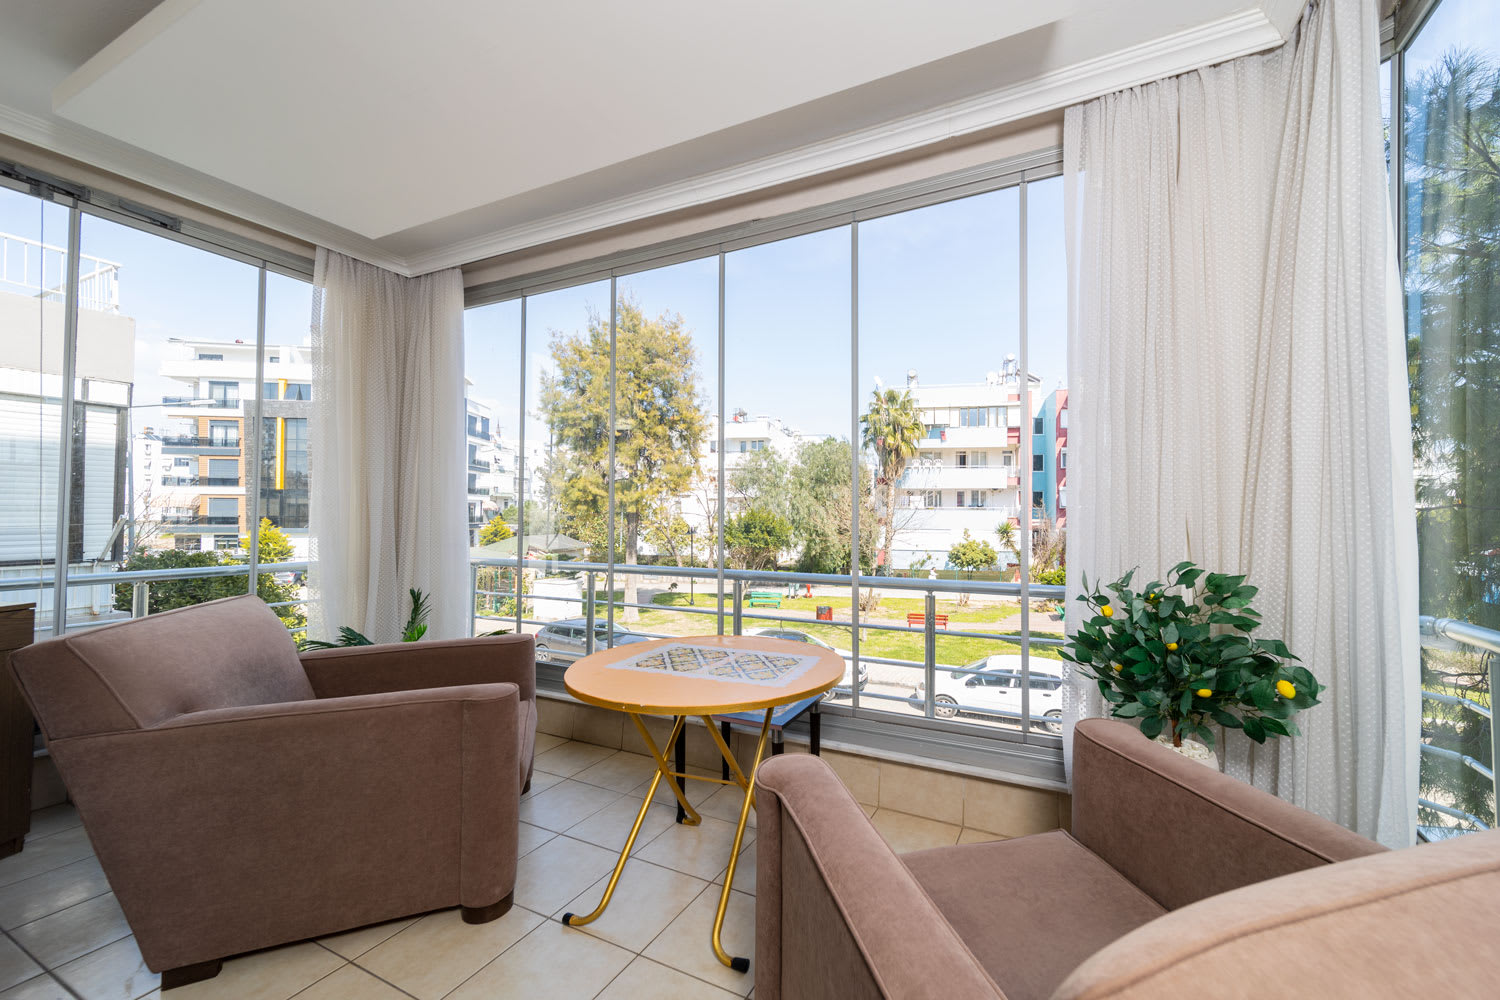 Property Image 1 - Central and Colorful Apartment near Beach in Muratpasa, Antalya